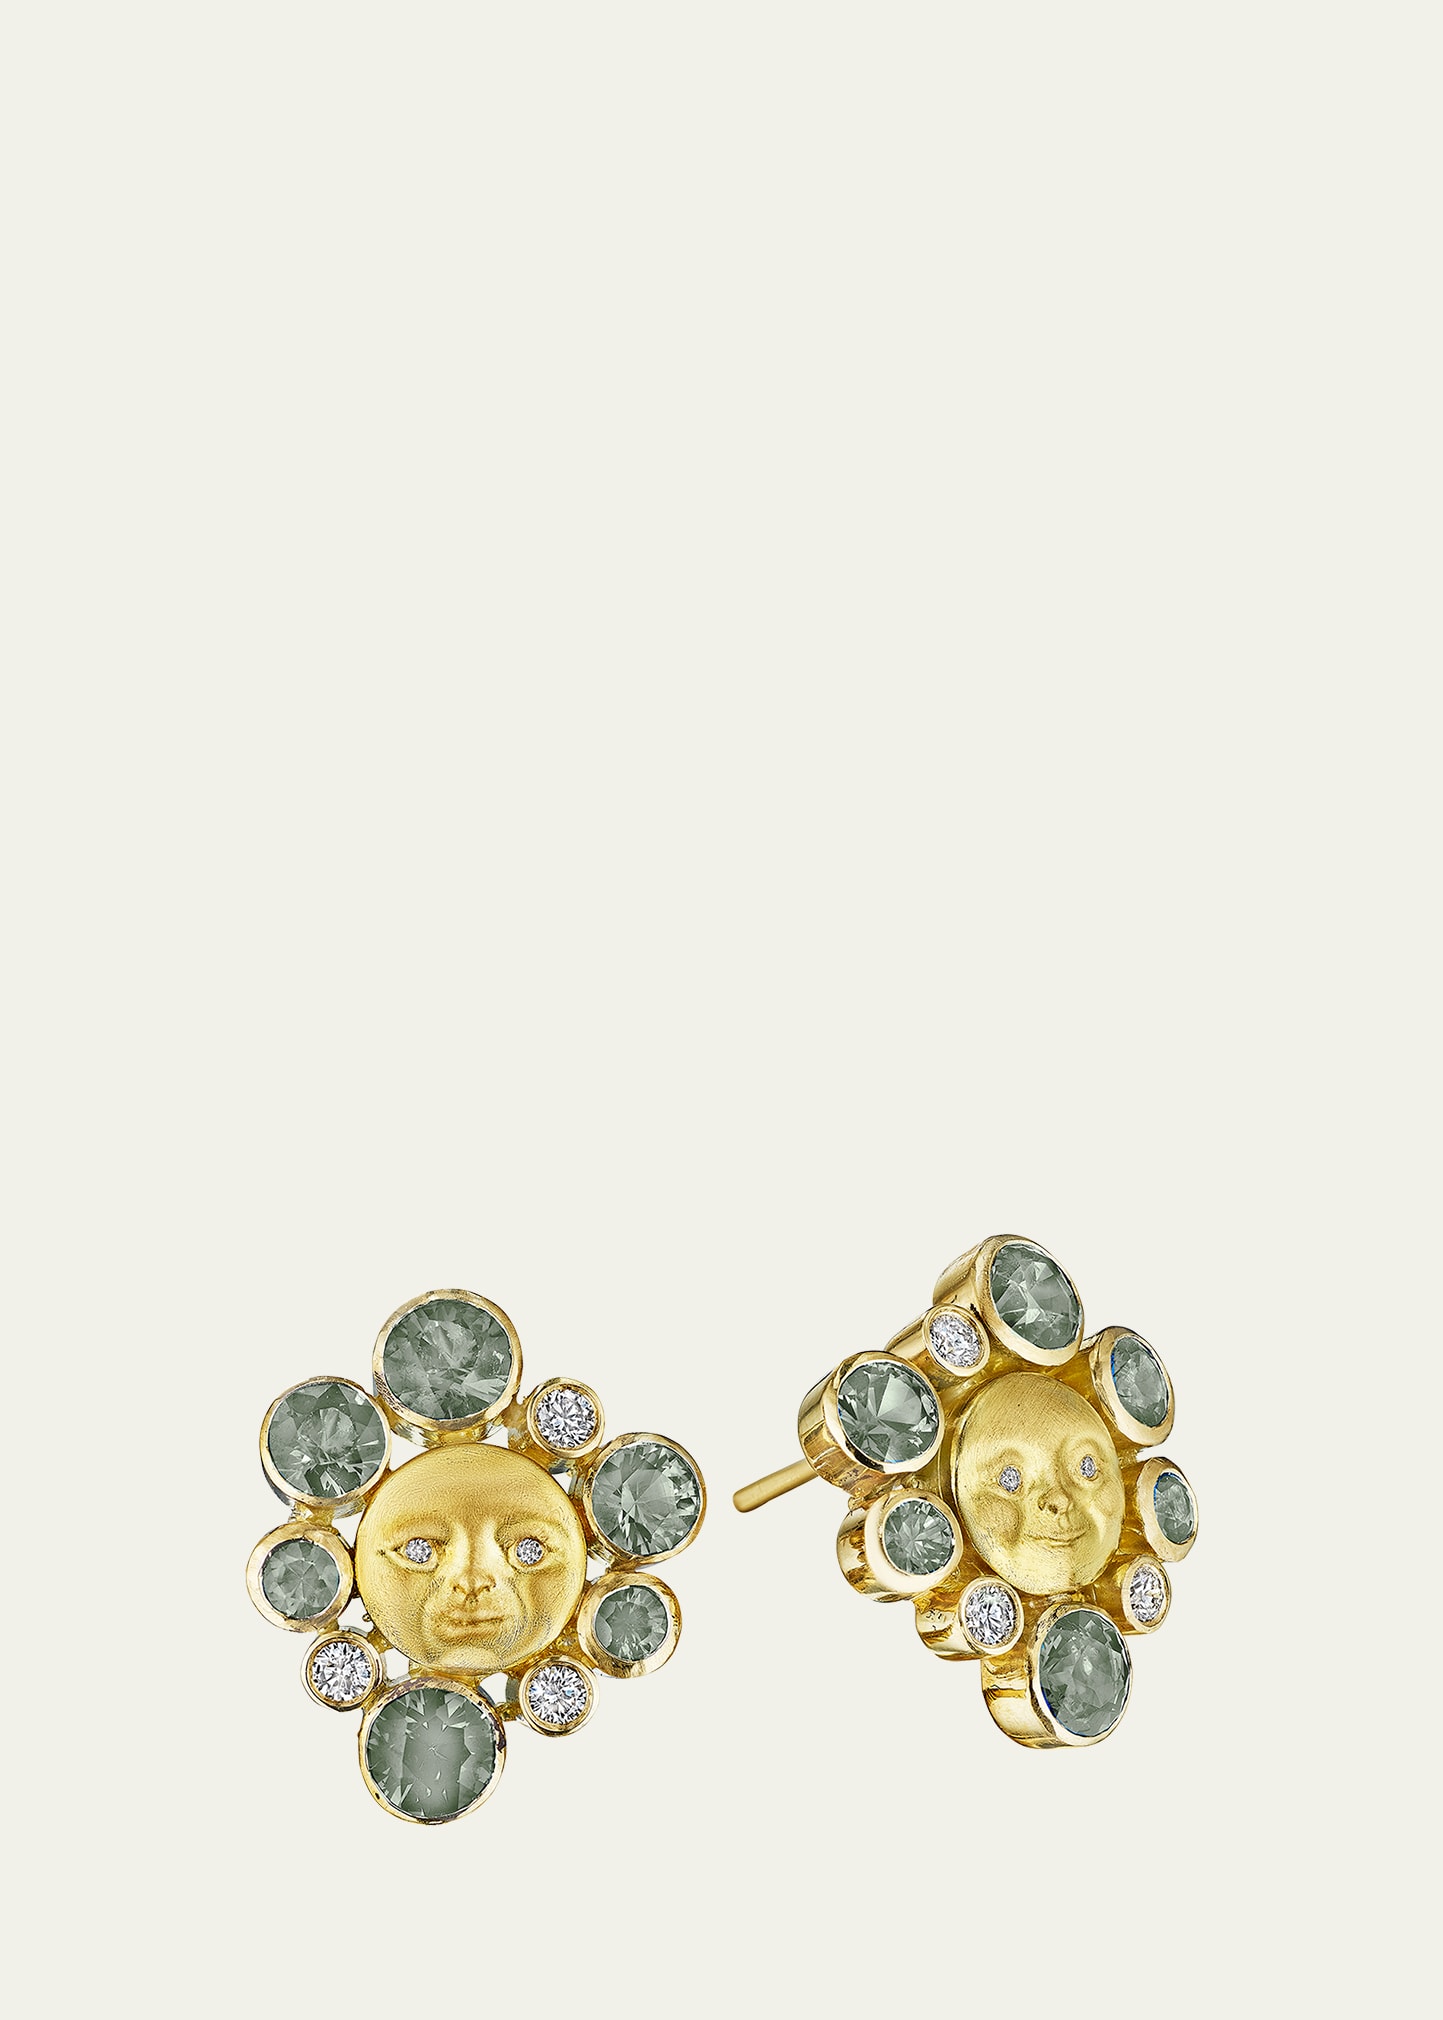 Anthony Lent Lunar Galaxy Button Earrings with Green Sapphires and Diamonds in 18K Gold